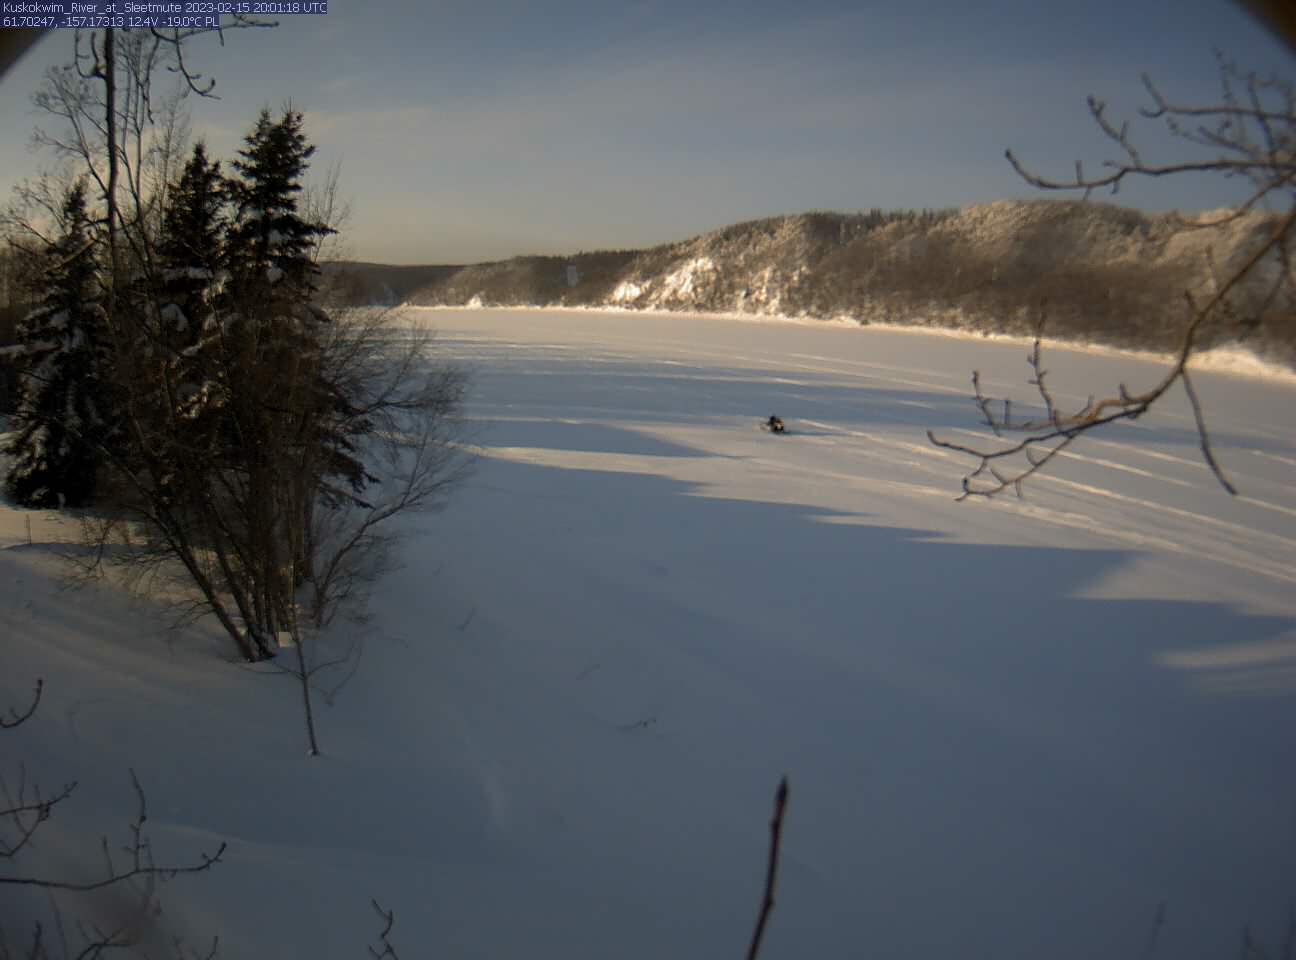 a lone snowmobile, tiny in the big landscape, travels away from us on an ice and snow-covered river. Low sunlight casts long shadows out onto the snow of the pine trees lining the riverbank. The sky is pale blue. The tree-covered hills on the far side of the river have fresh snow in their branches.